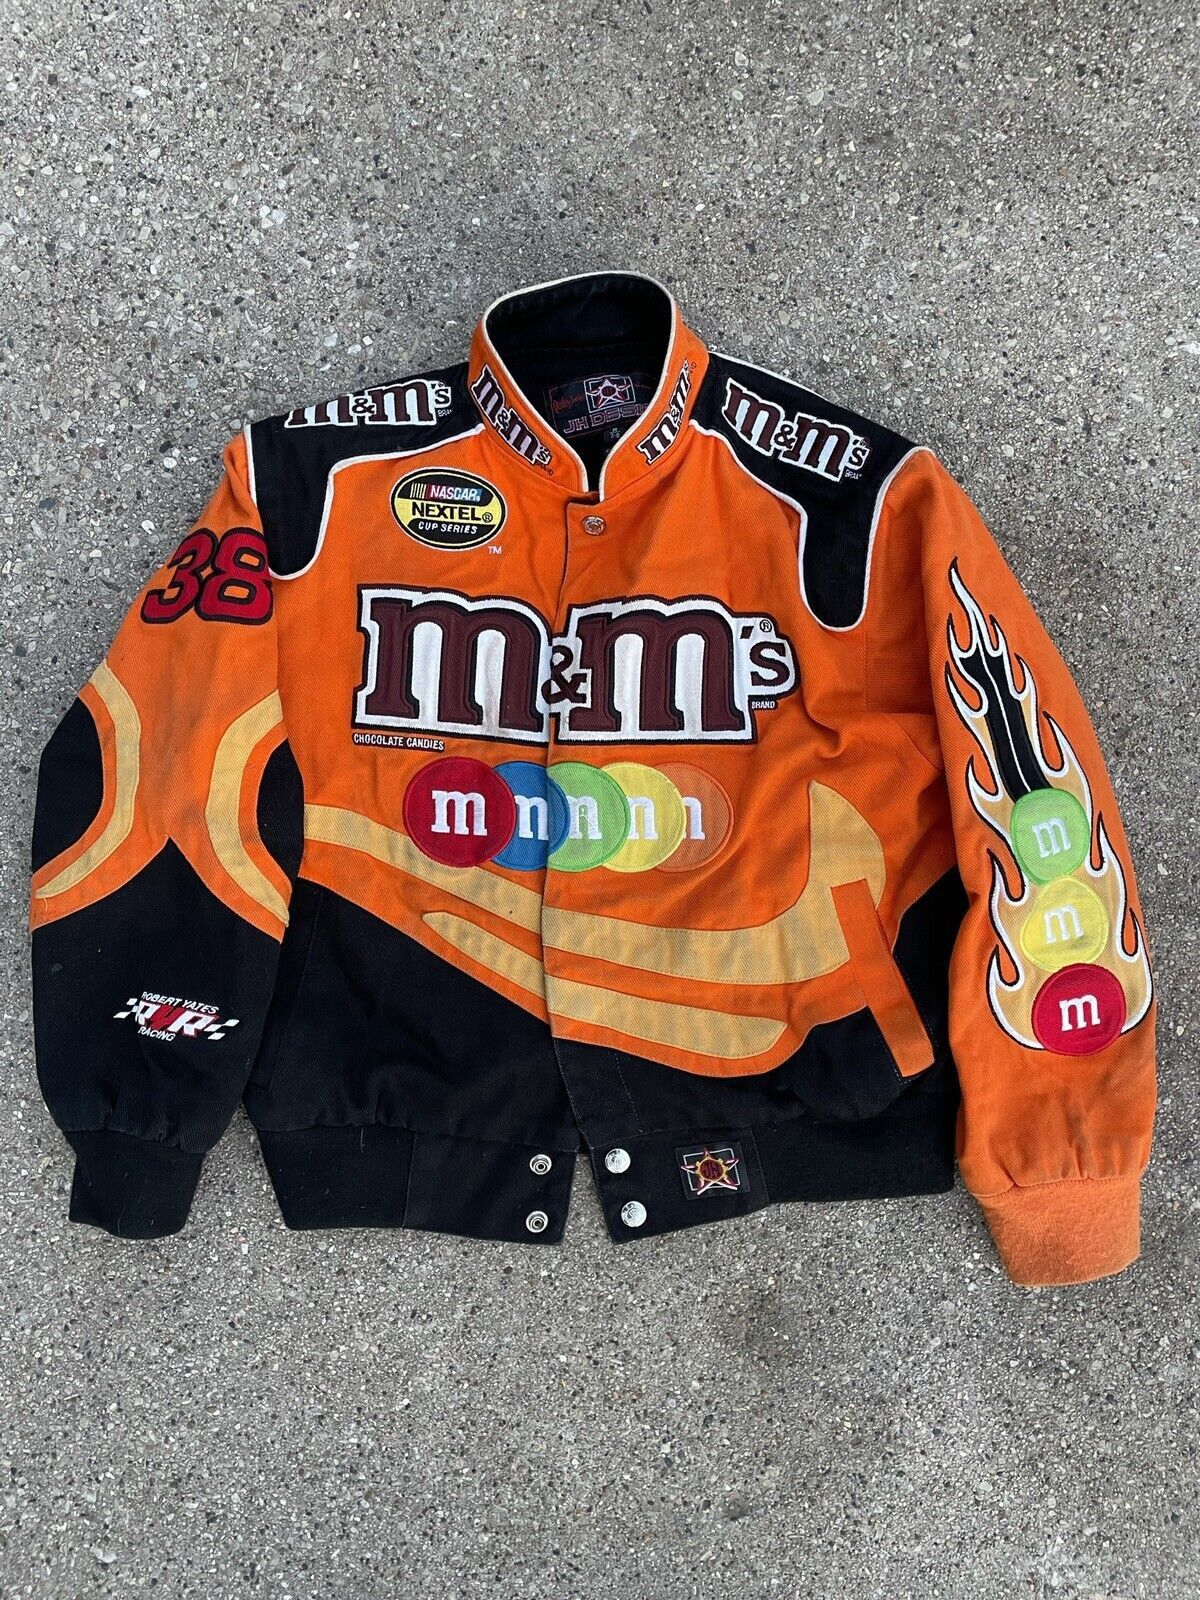 Jeff Hamilton x M&M Nascar Jacket has landed at our showroom. It's the last  Sunday of the year so it's a great time to snag this vintage…